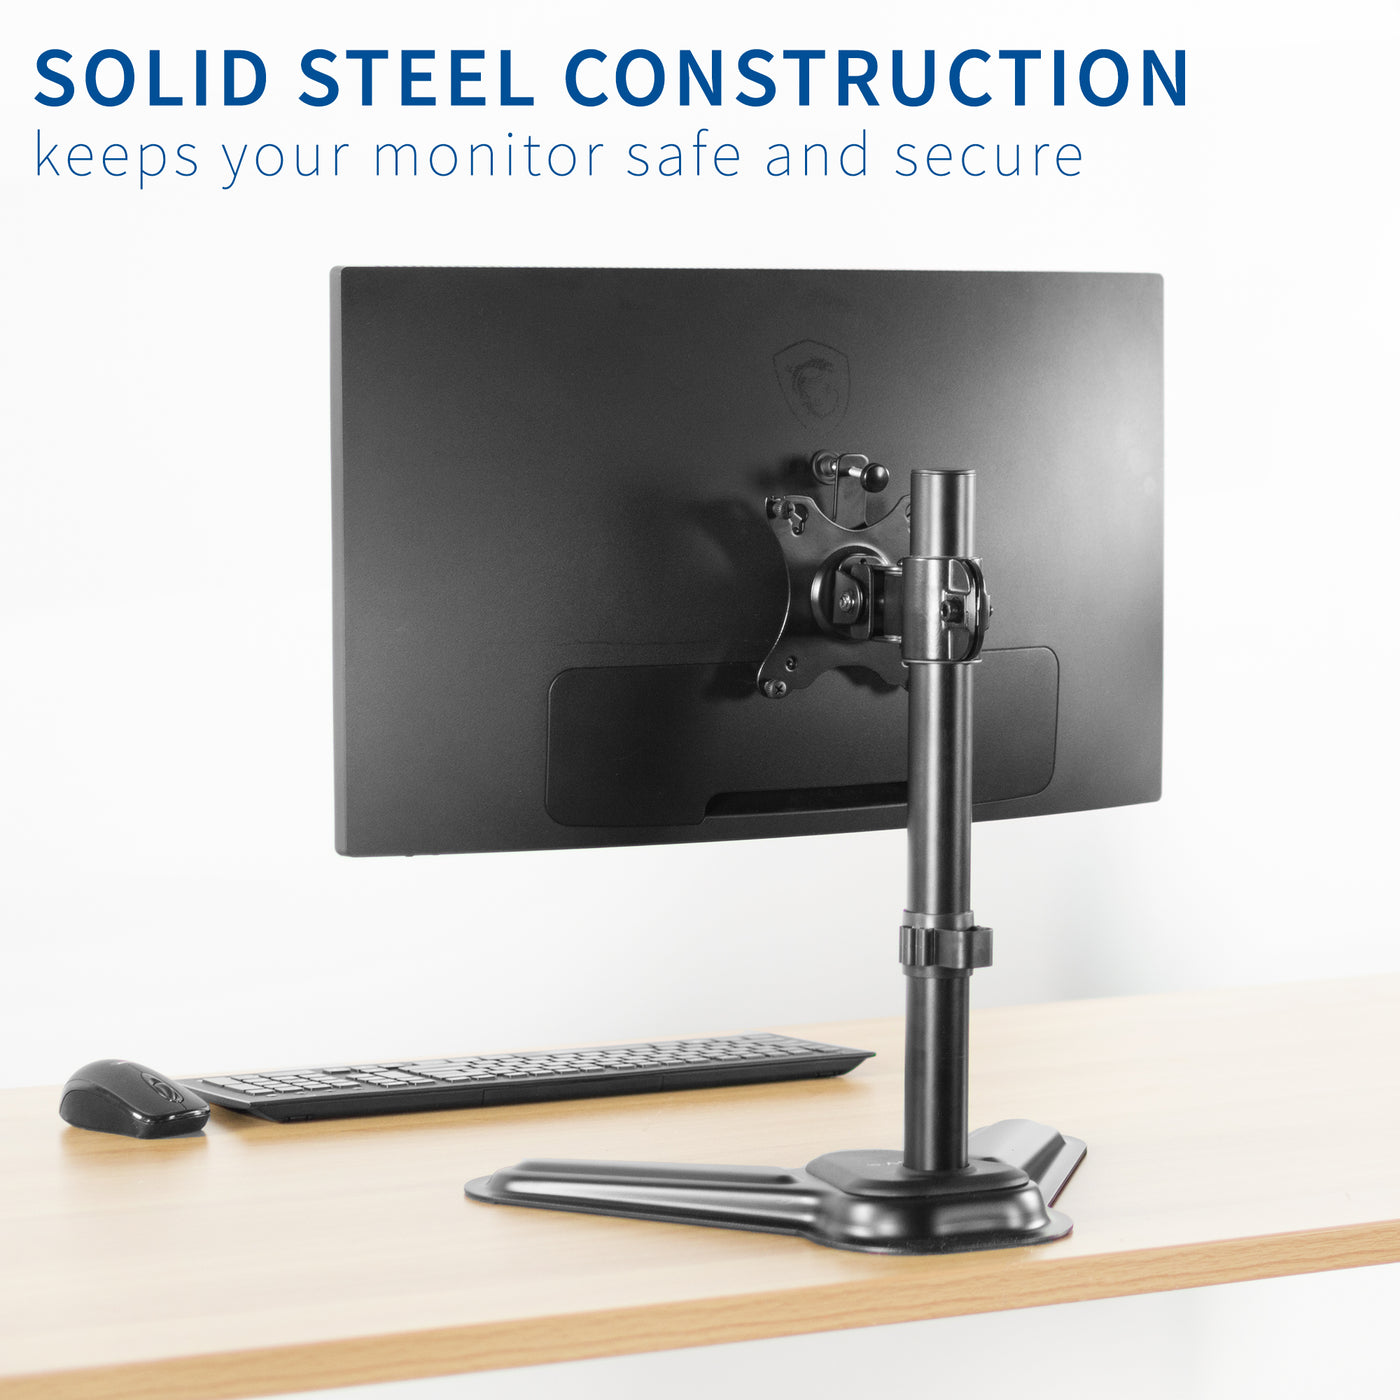 Solid steel construction supports your monitor while keeping it safe and secure.